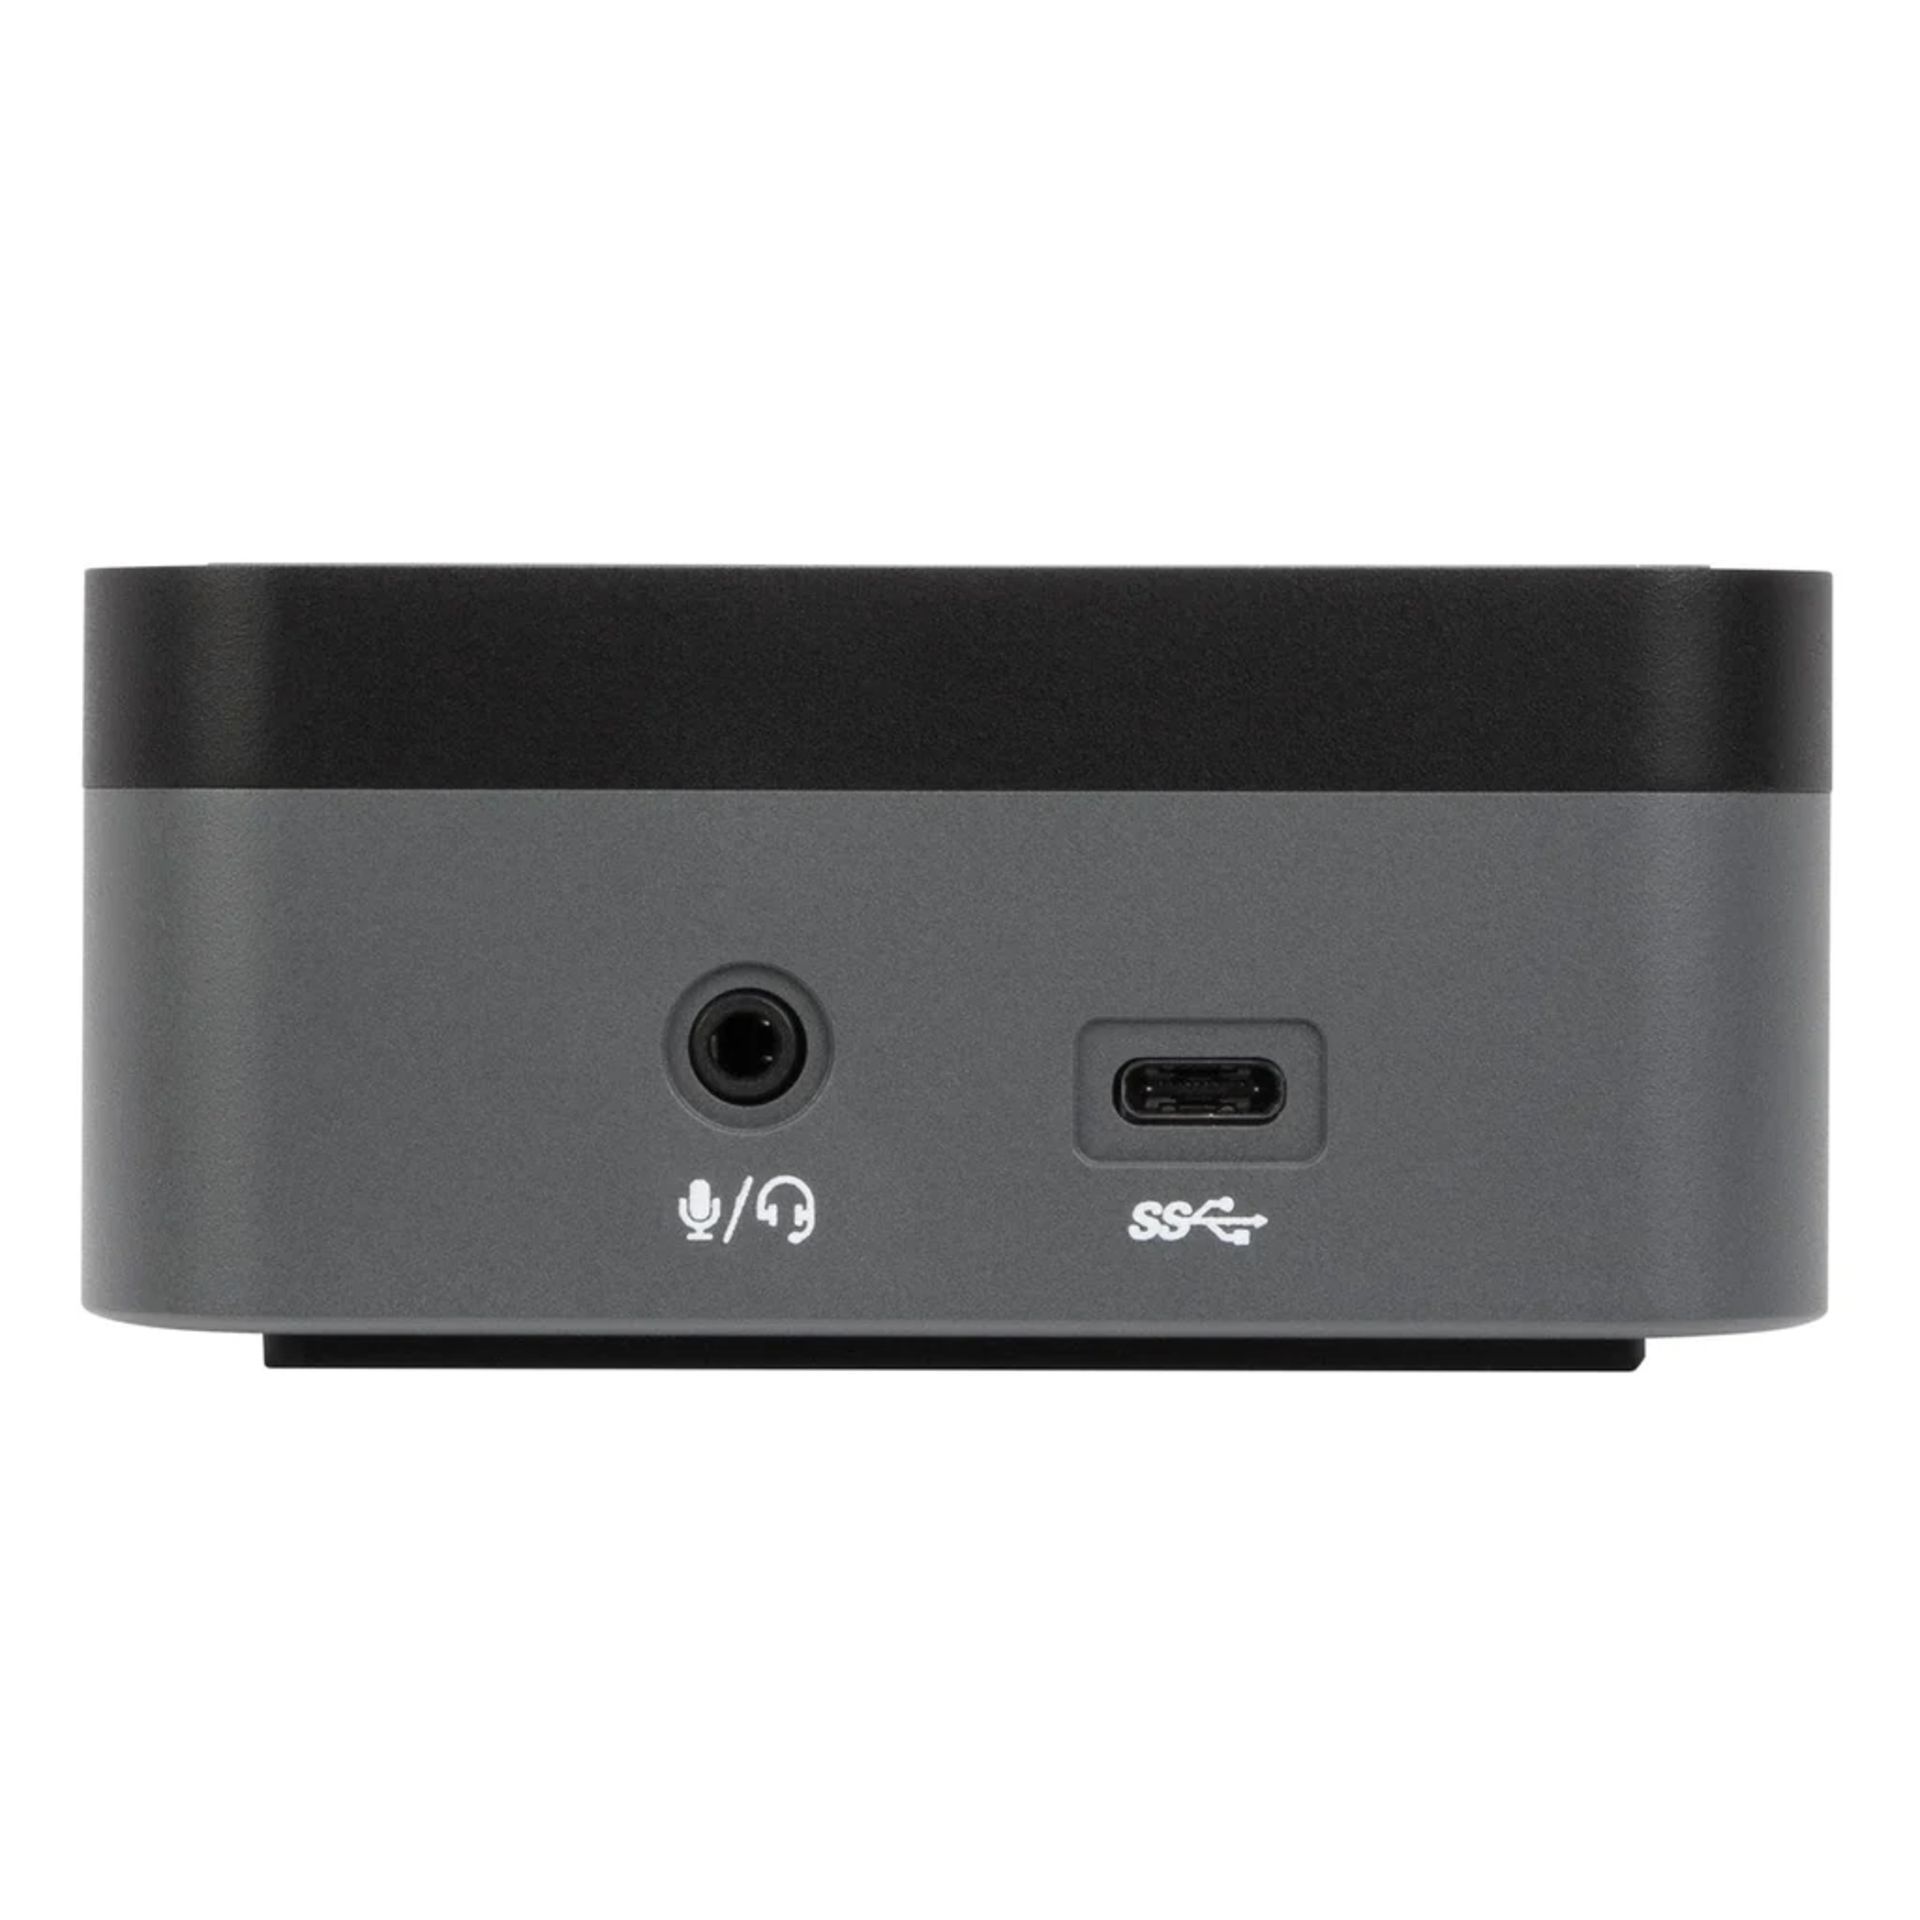 TARGUS USB-C Universal Quad 4K (QV4K) Docking Station with 100W Power Delivery. RRP £391. Boost - Image 5 of 6